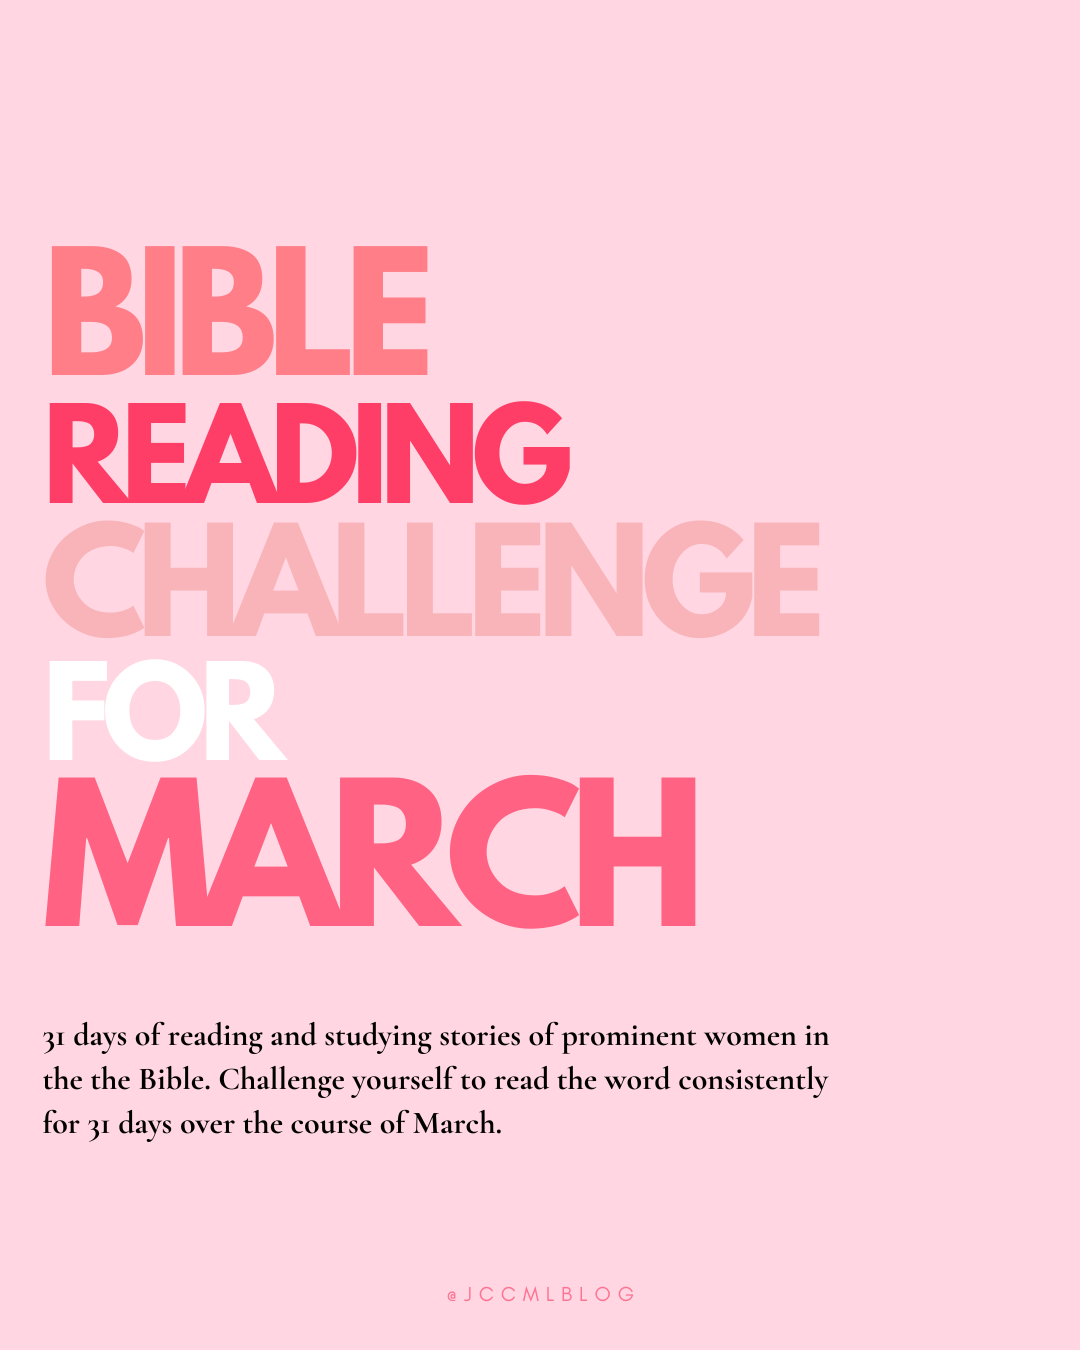 Bible Reading Challenge for March